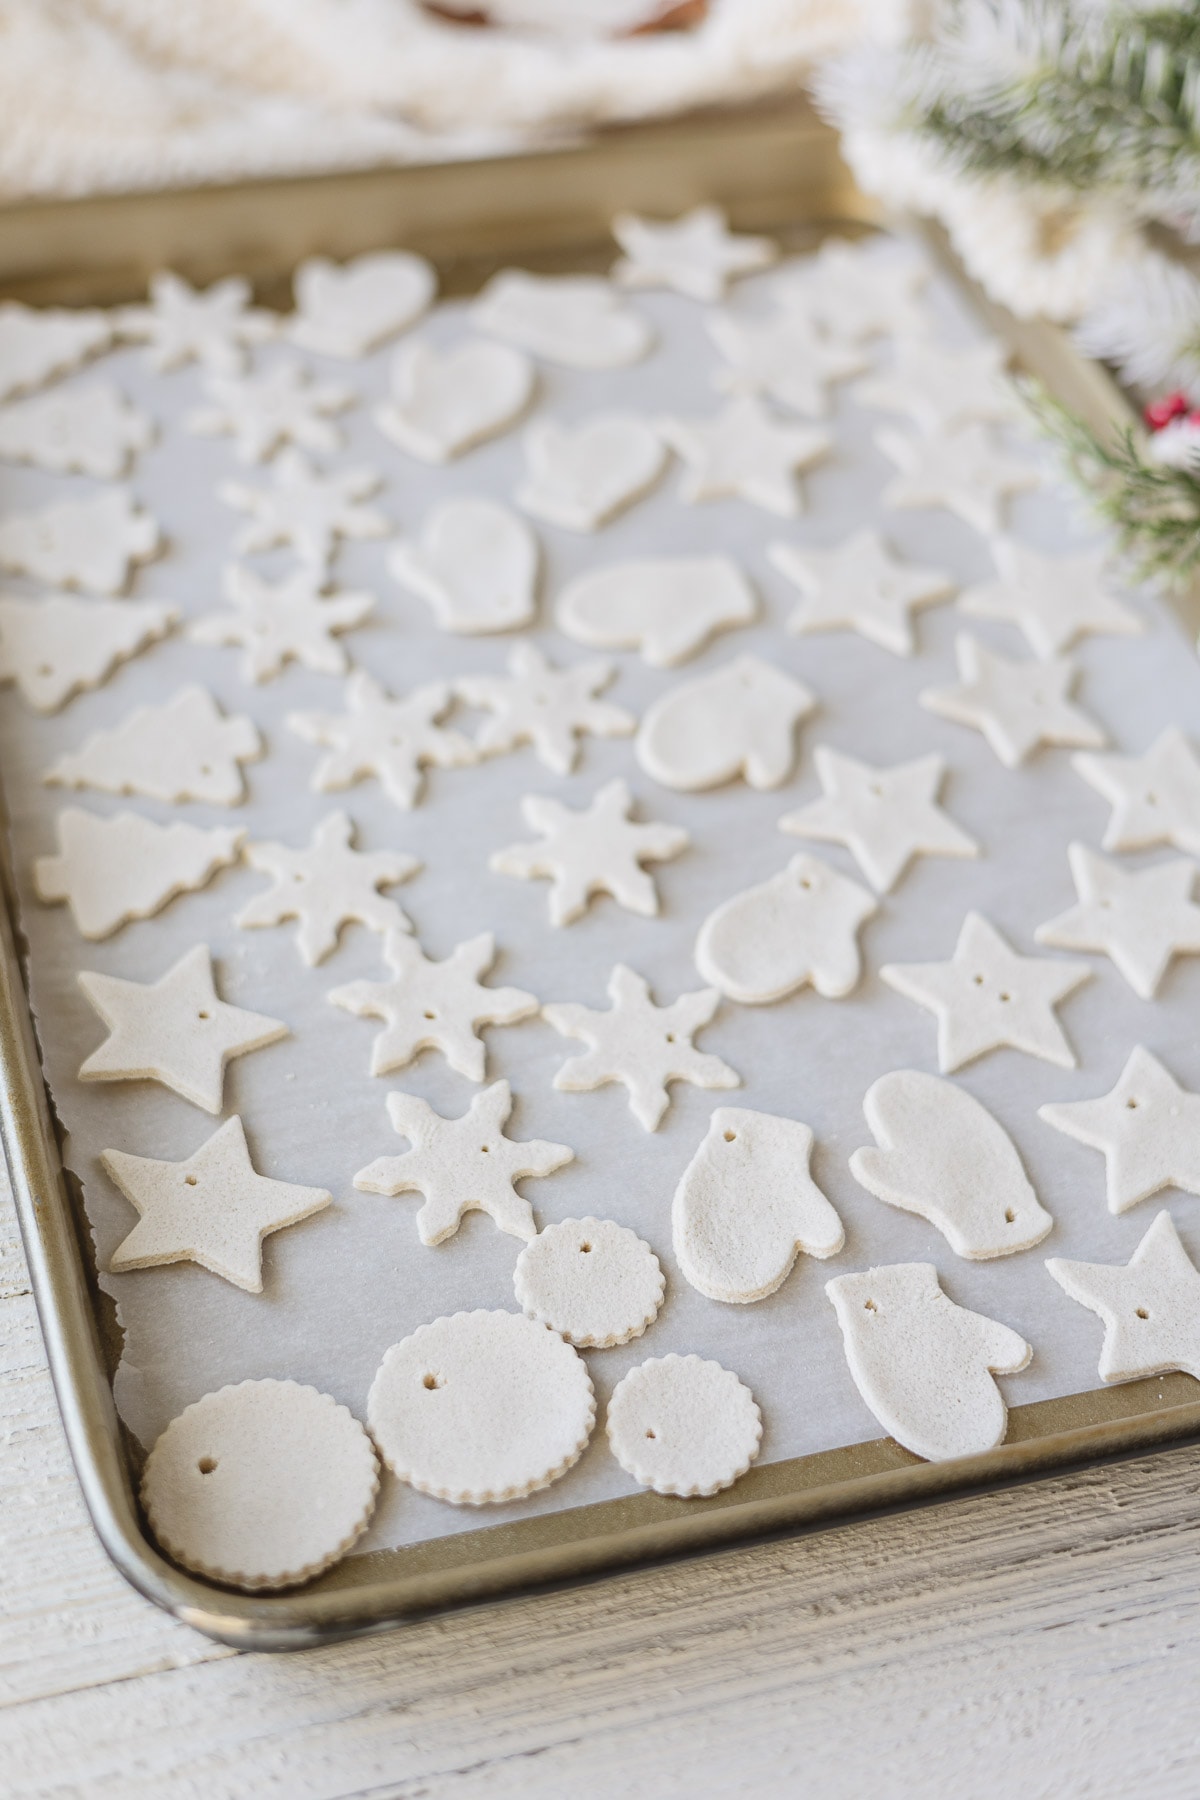 How to Make Salt Dough Ornaments (and other stuff!)